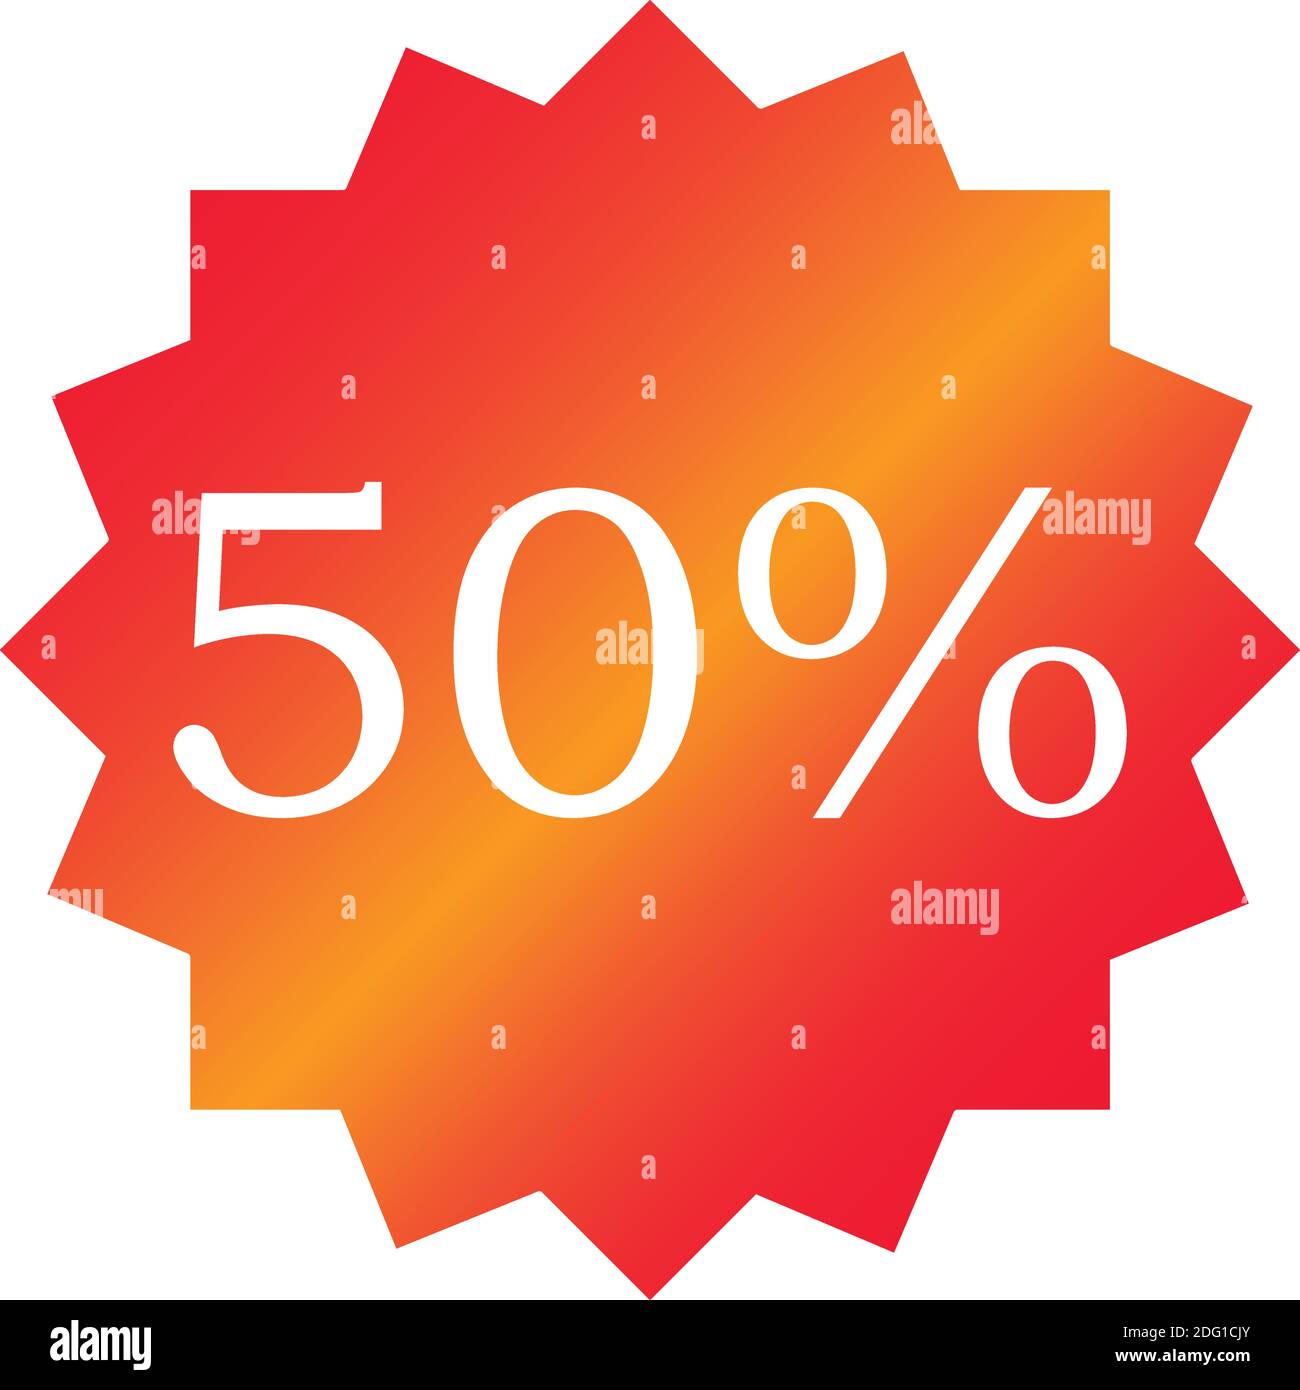 Sale - 50% off all items, Templates